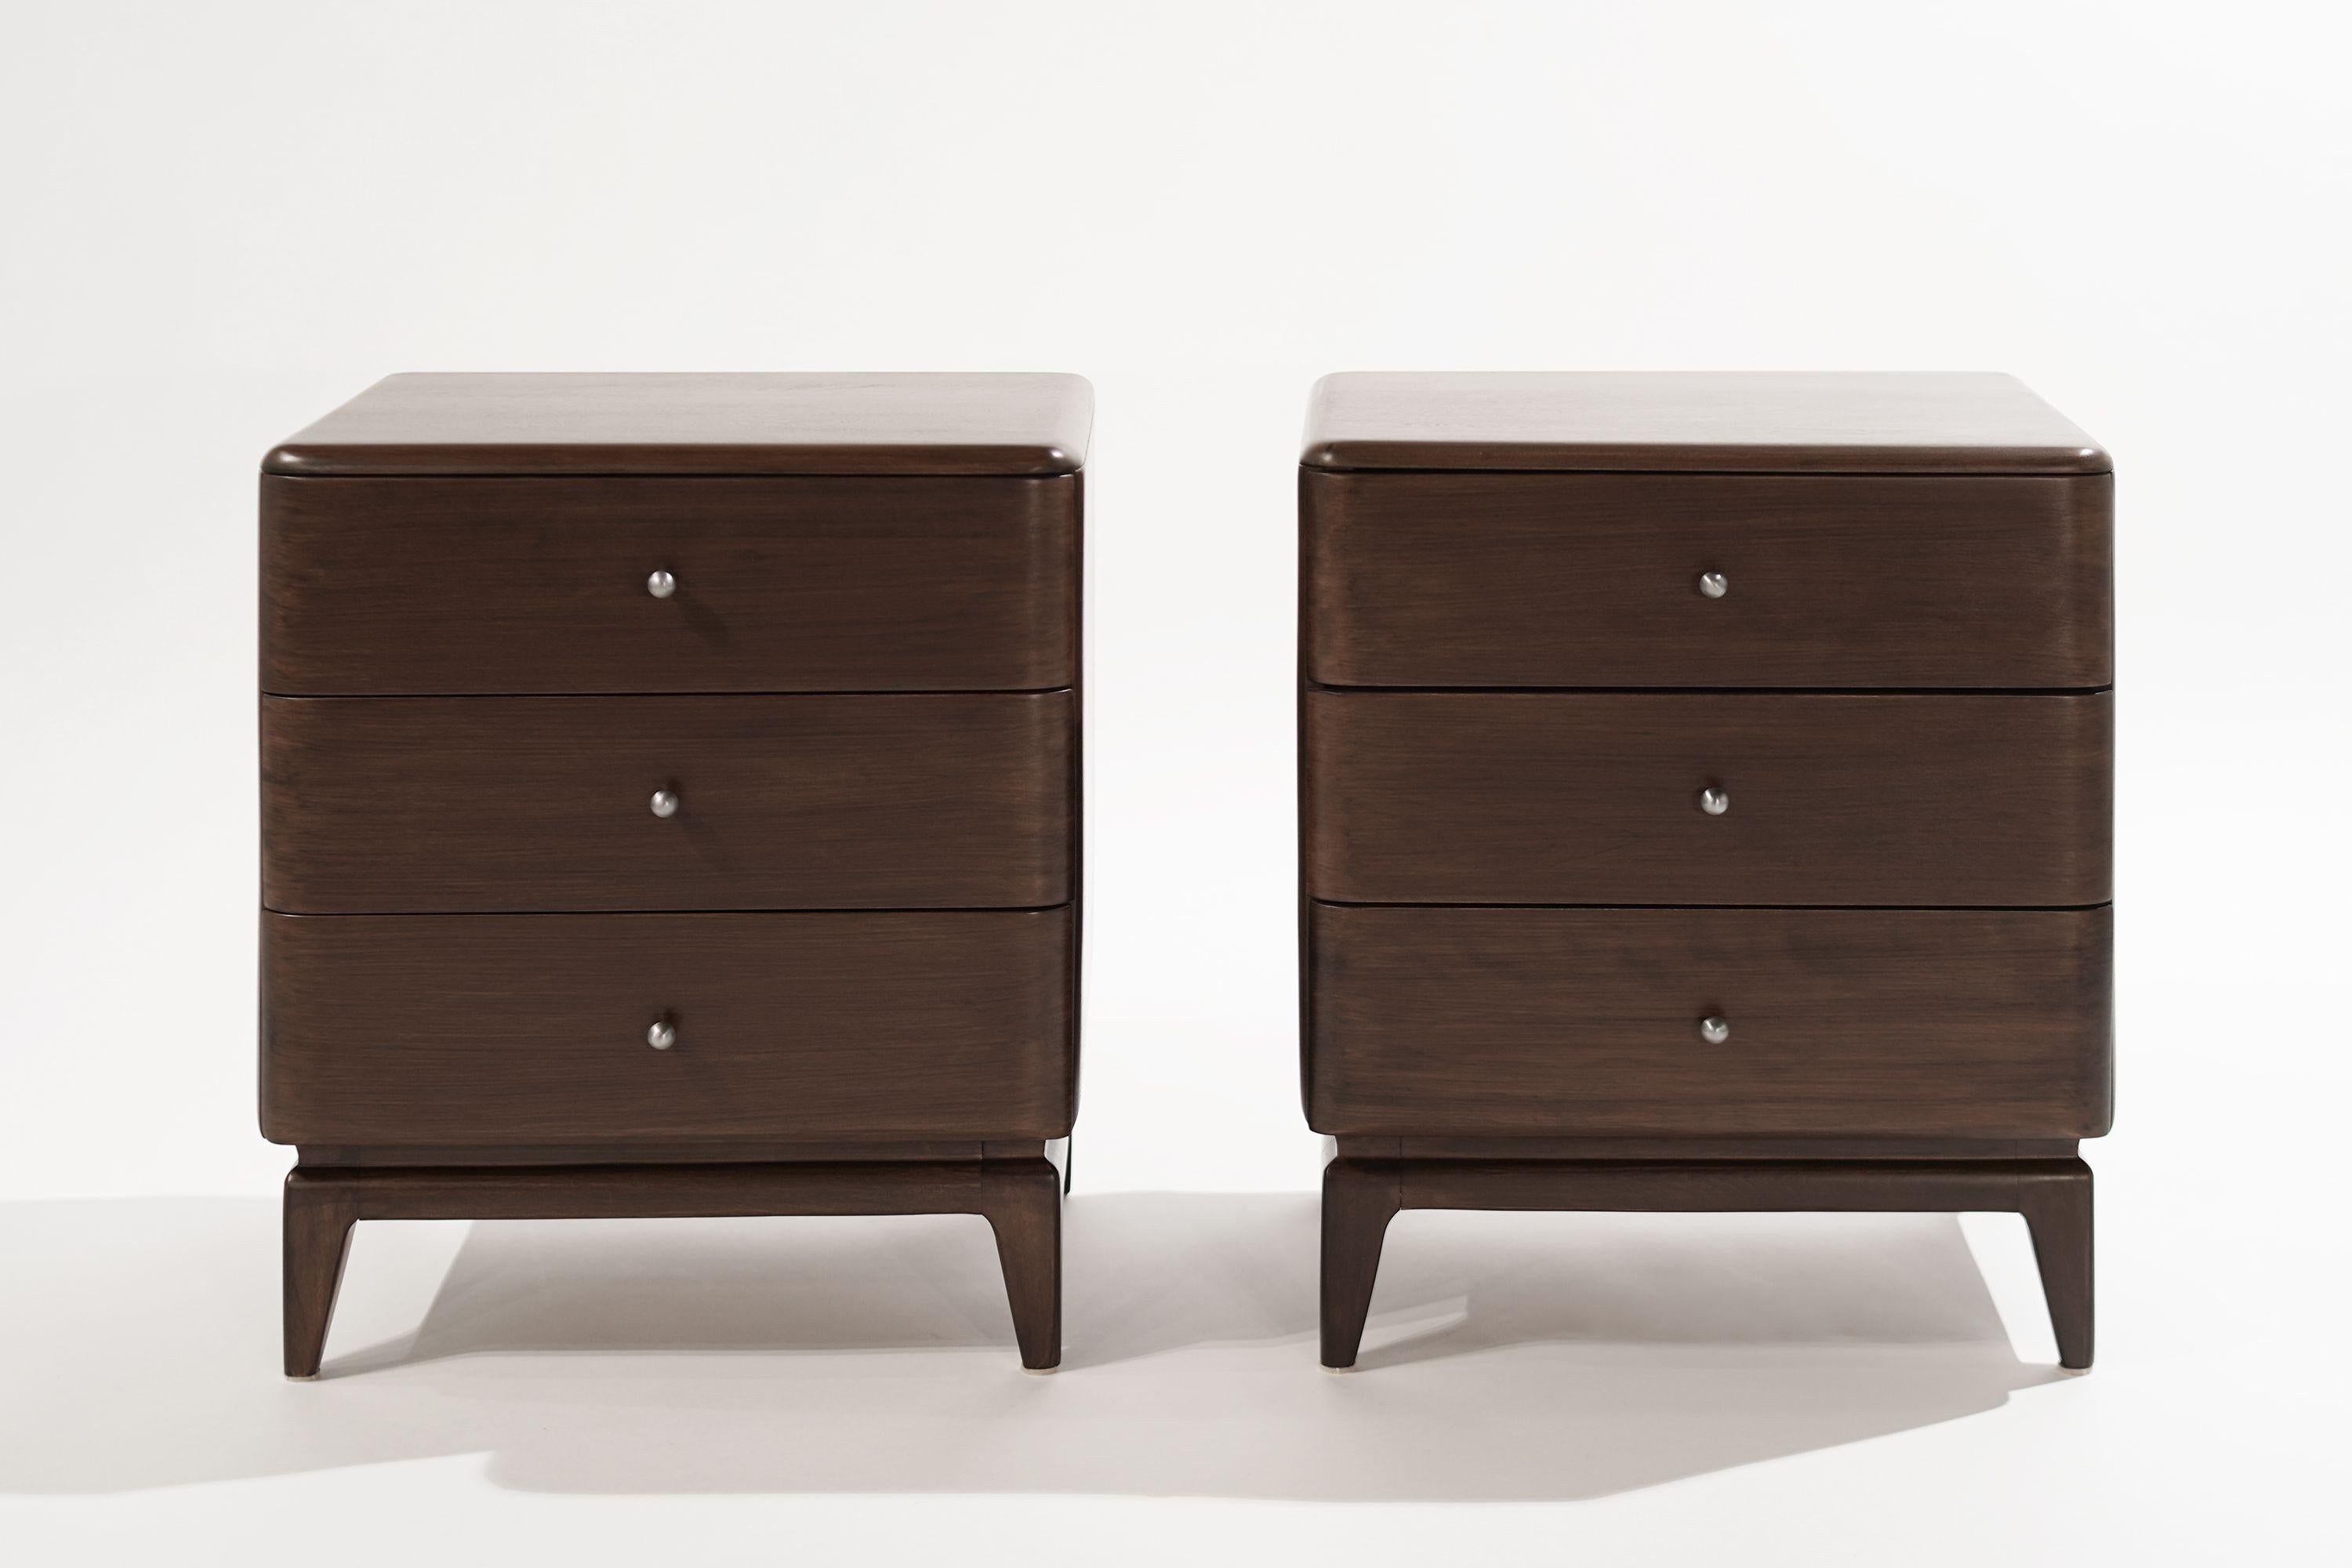 Set of end tables or nightstands executed in maple by Heywood Wakefield, circa 1950s. Featuring three drawers with polished steel pulls. Completely restored.

Other designers from this era include Jens Risom, Paul McCobb, George Nakashima, Tommi